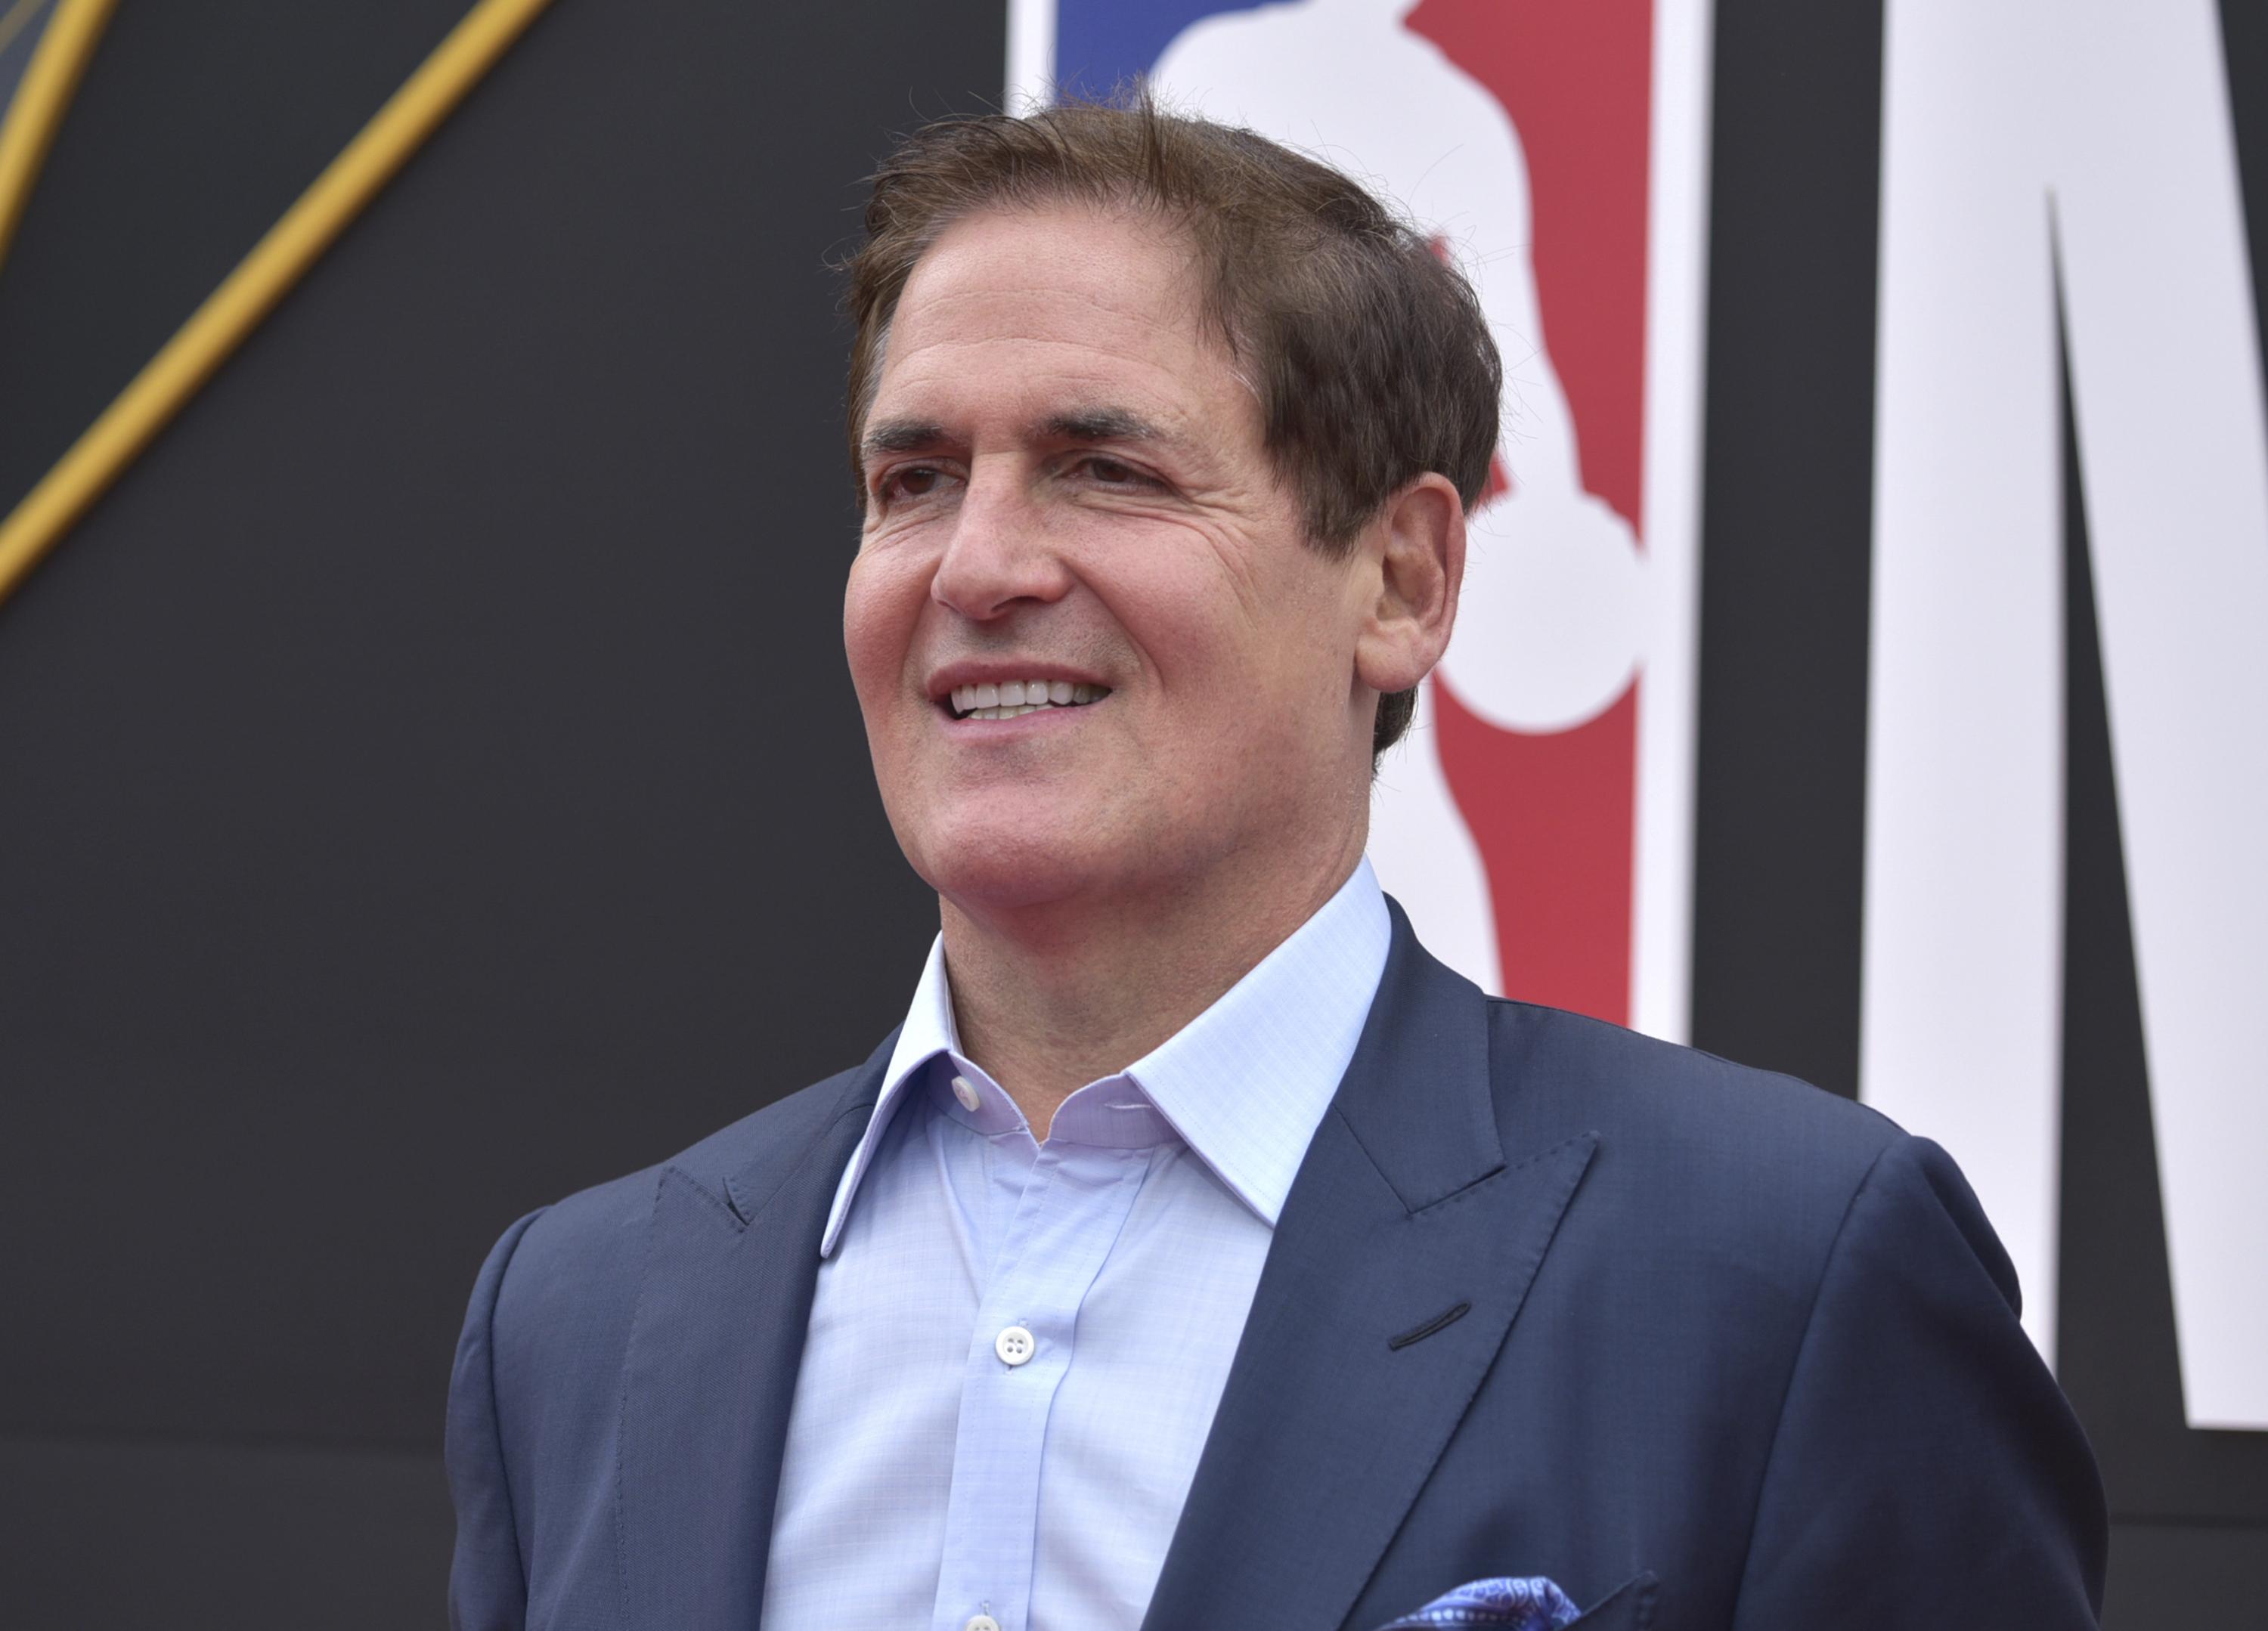 Mark Cuban Condemns China On Human Rights But Avoids Specifics